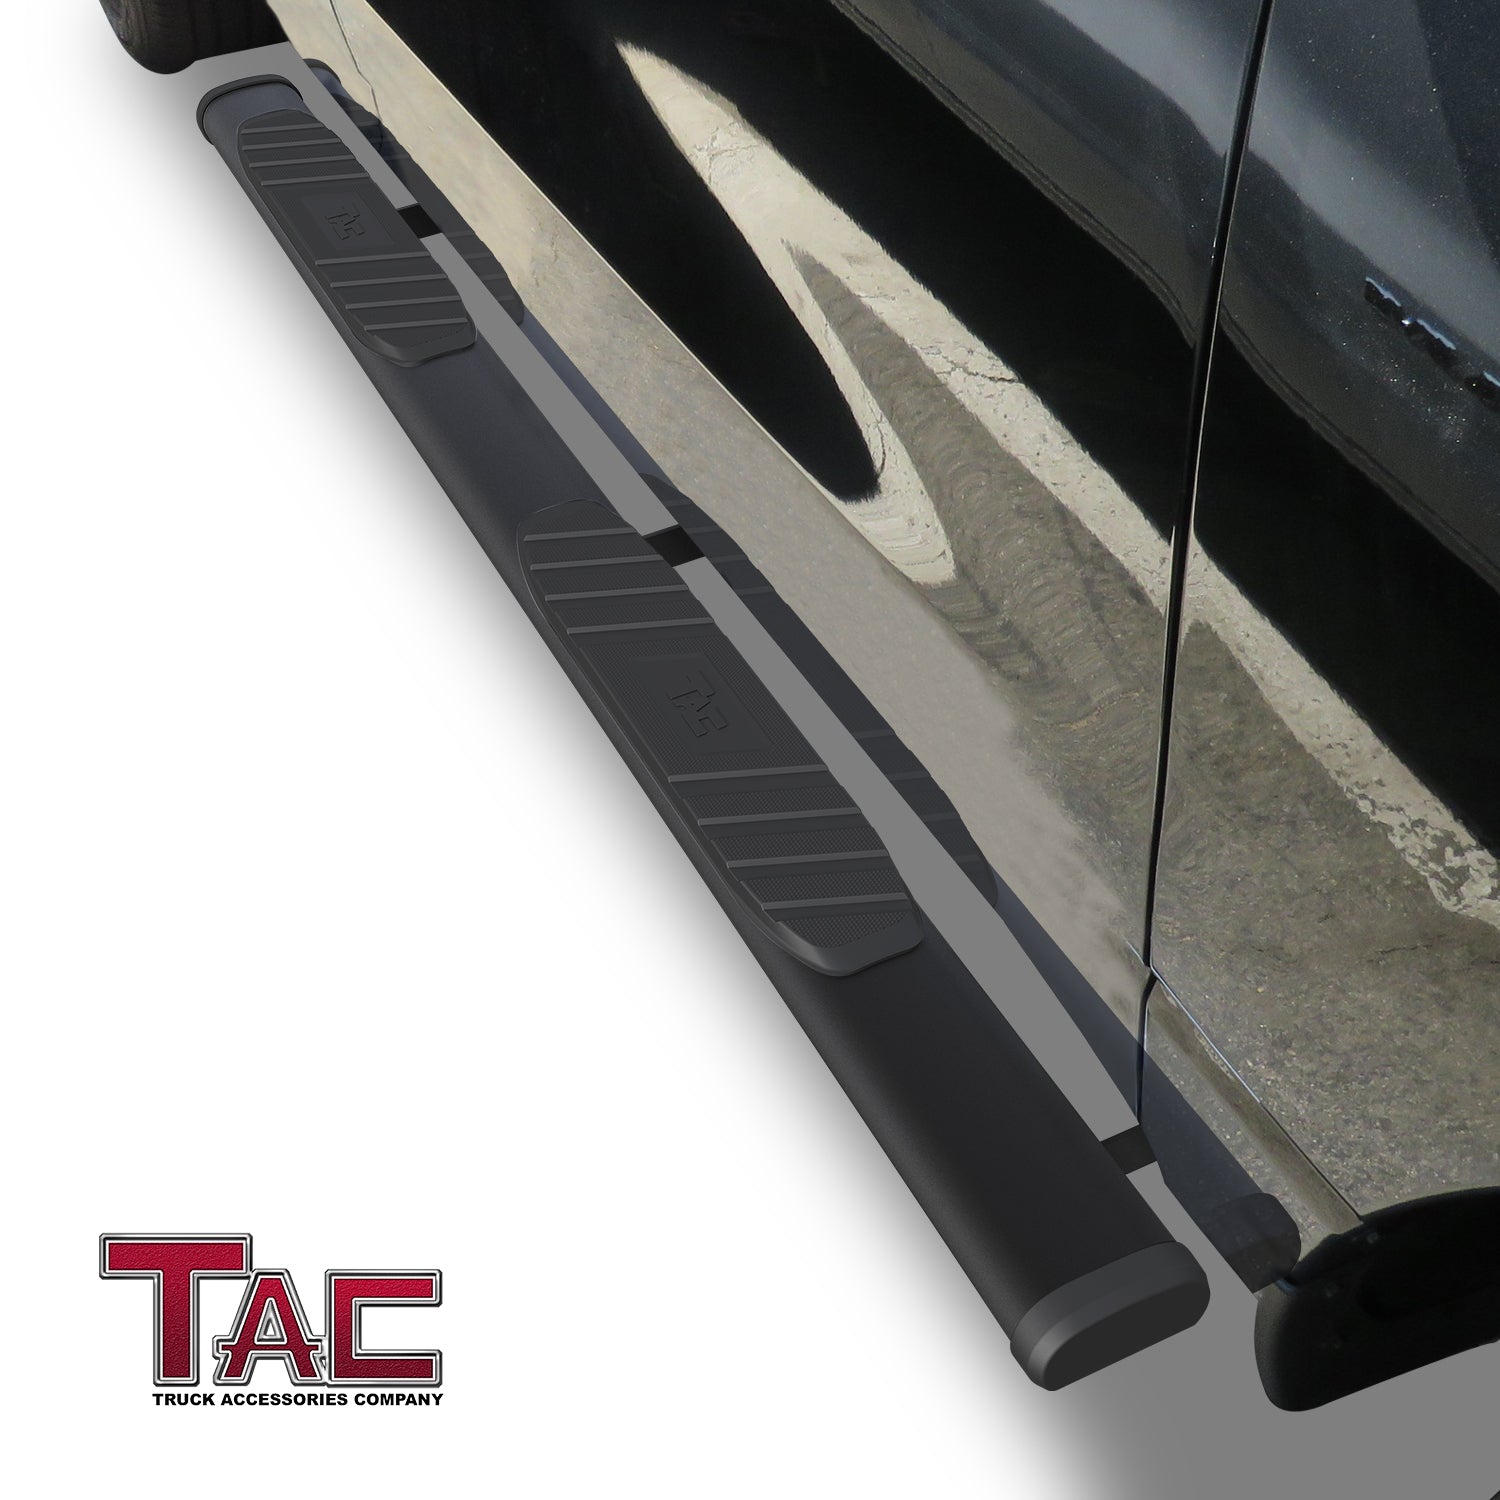 TAC Arrow Side Steps Running Boards Compatible with 2019-2025 Dodge RAM 1500 Quad Cab(Excl. 2019-2024 Ram 1500 Classic) Truck Pickup 5”  Aluminum Texture Black Step Rails Nerf Bars Lightweight